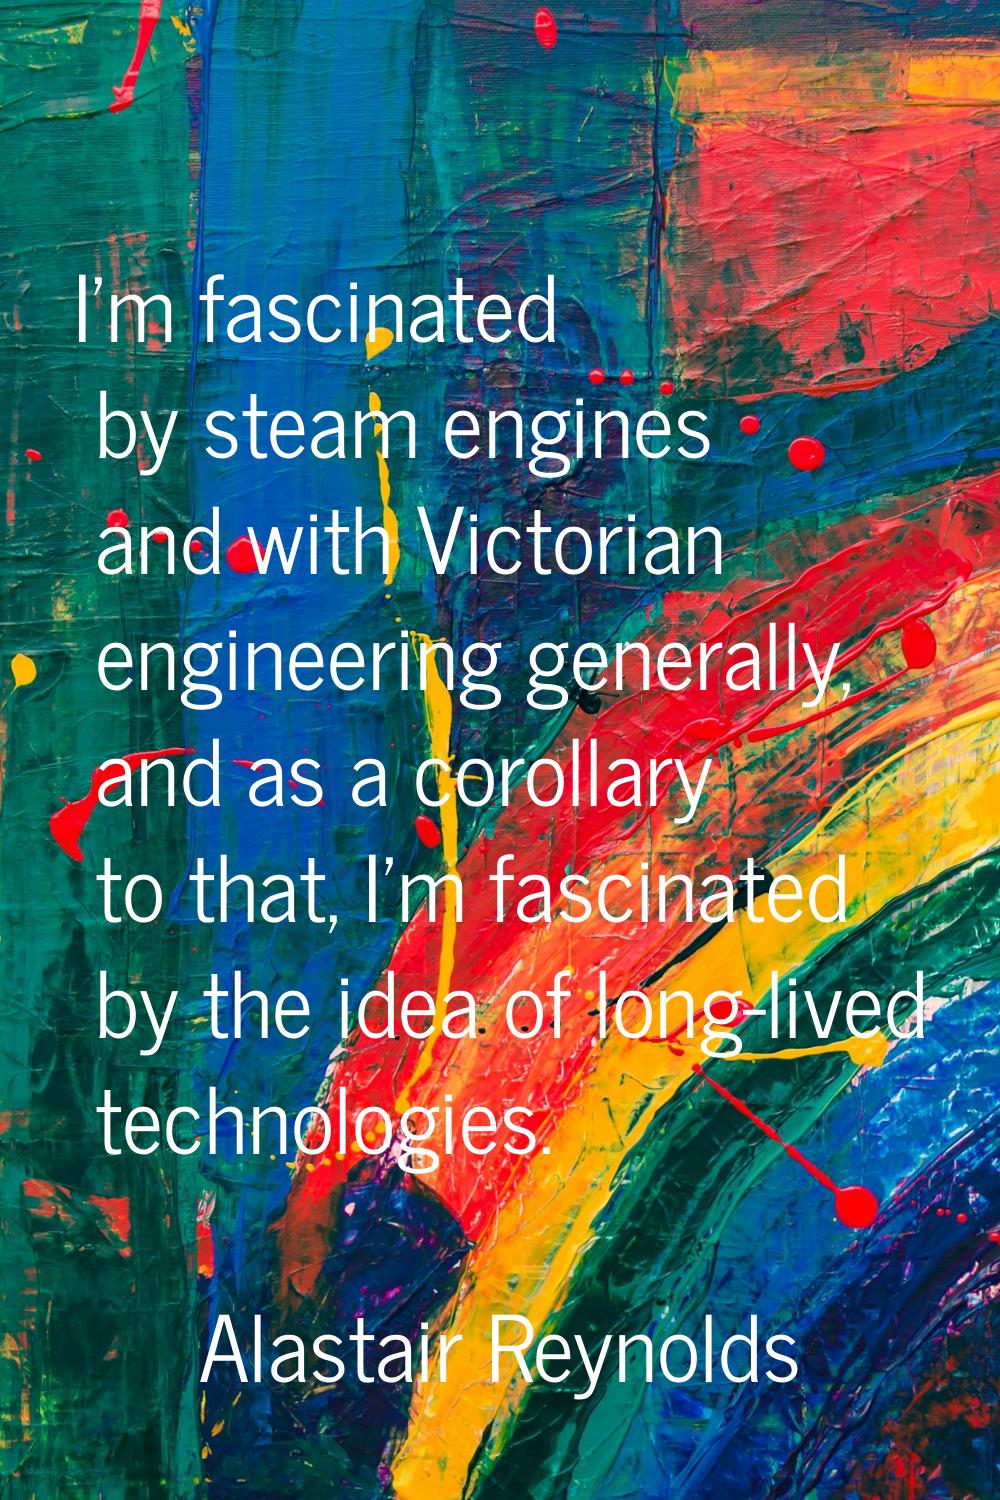 I'm fascinated by steam engines and with Victorian engineering generally, and as a corollary to tha